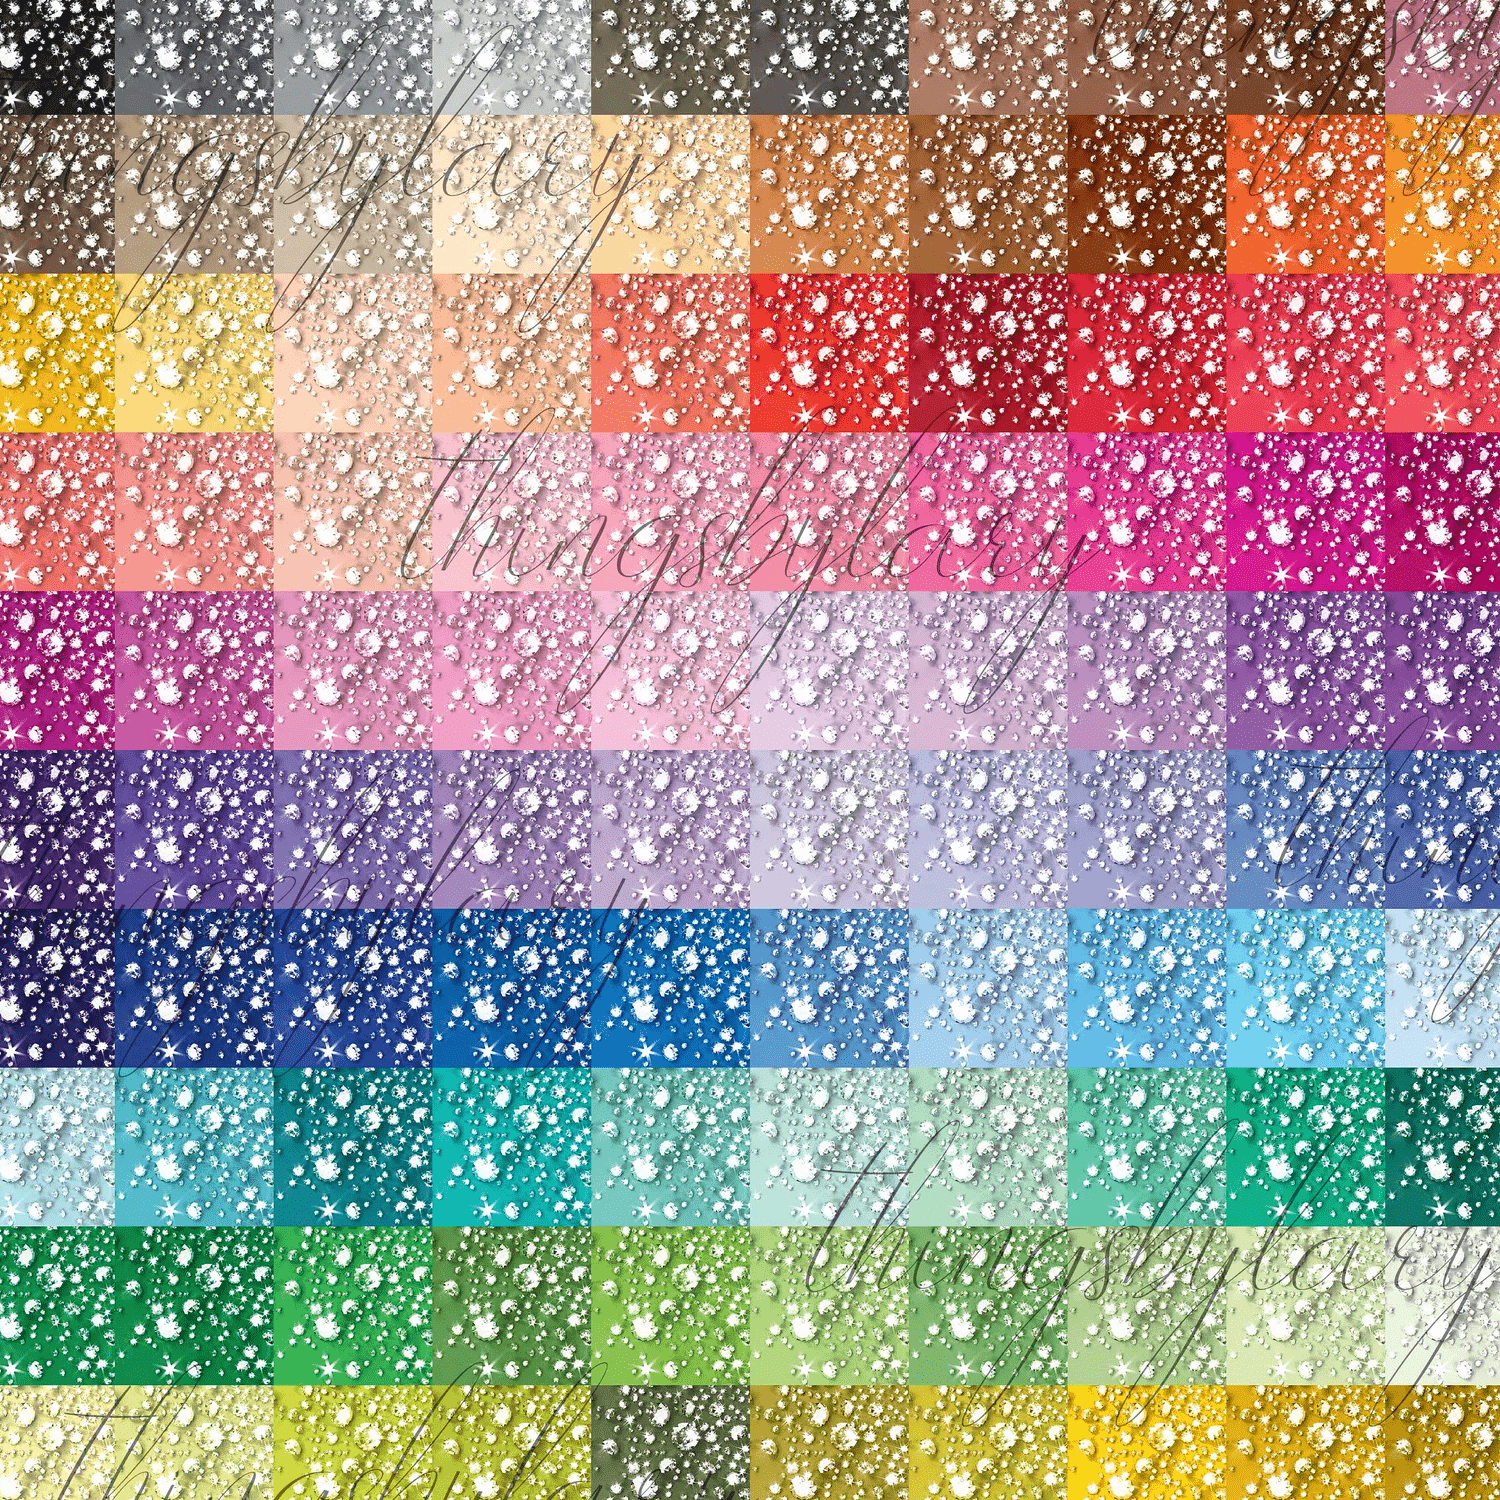 100 Bling Bling Real Diamond Background Digital Papers cover.